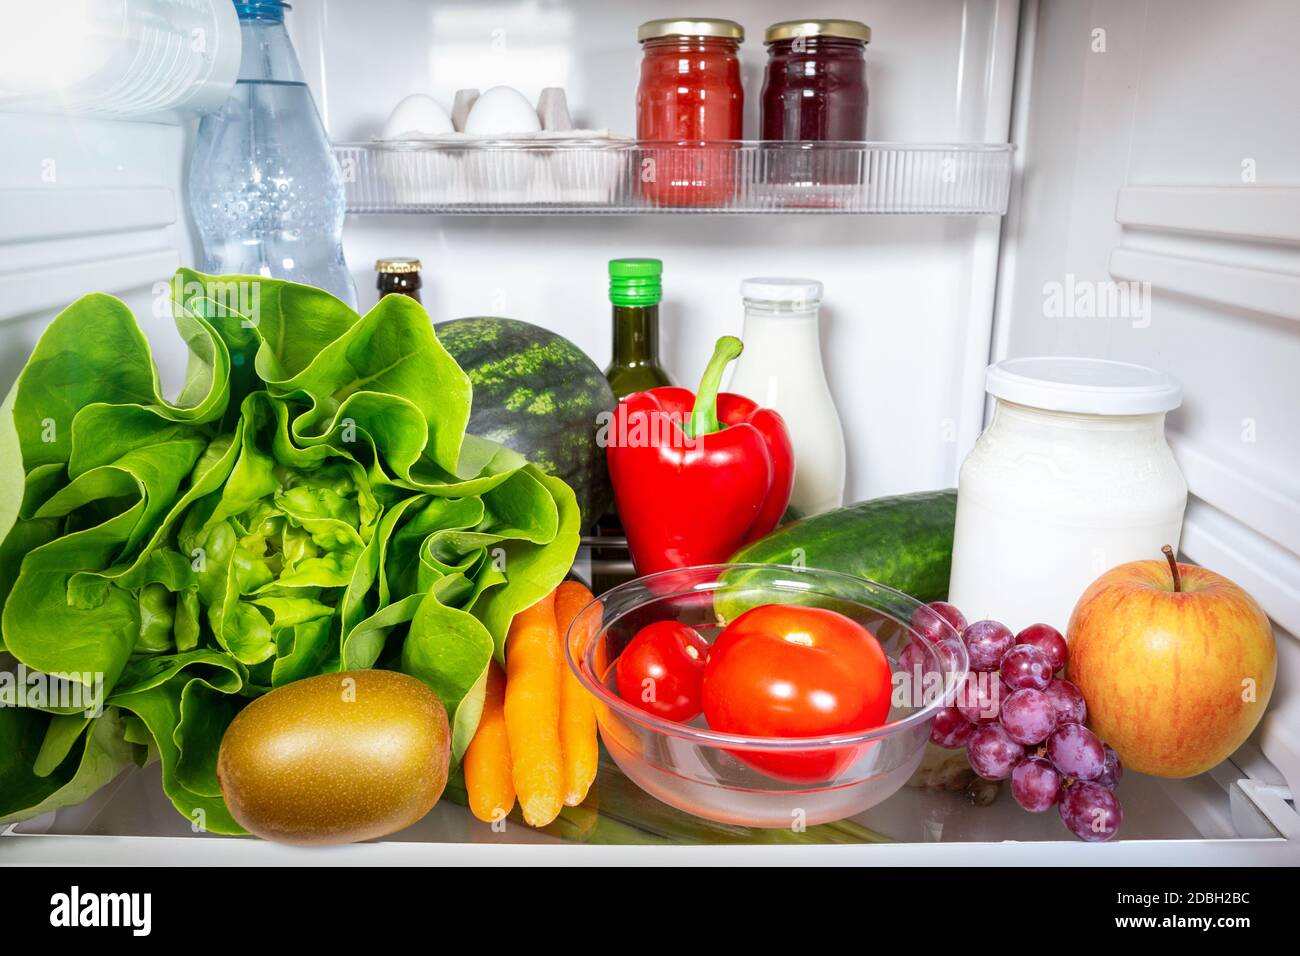 Variety of healthy foods inside a fridge Stock Photo